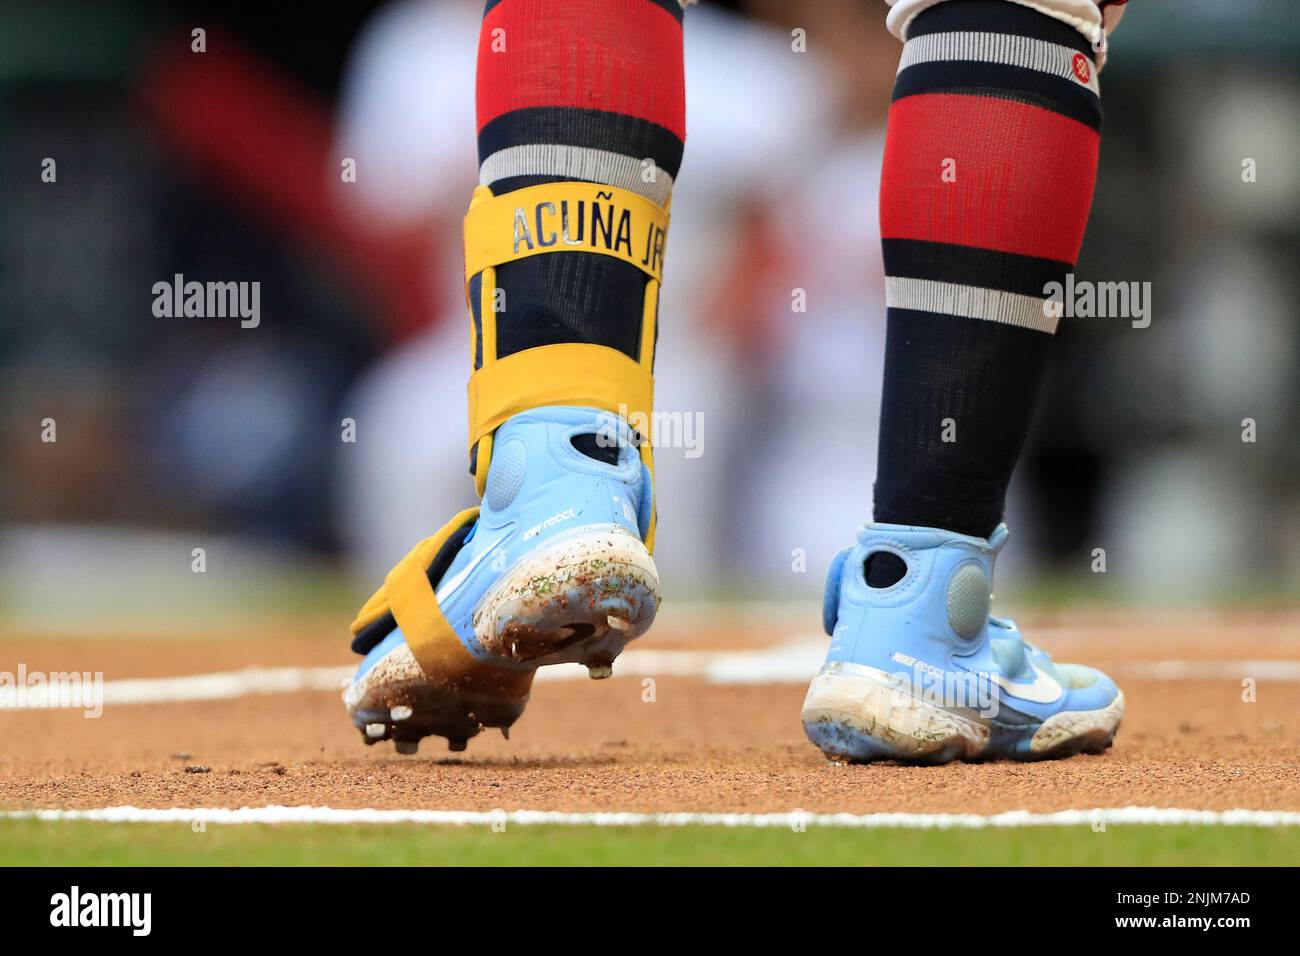 ATLANTA, GA - JULY 30: A detailed view of the cleats and lower leg